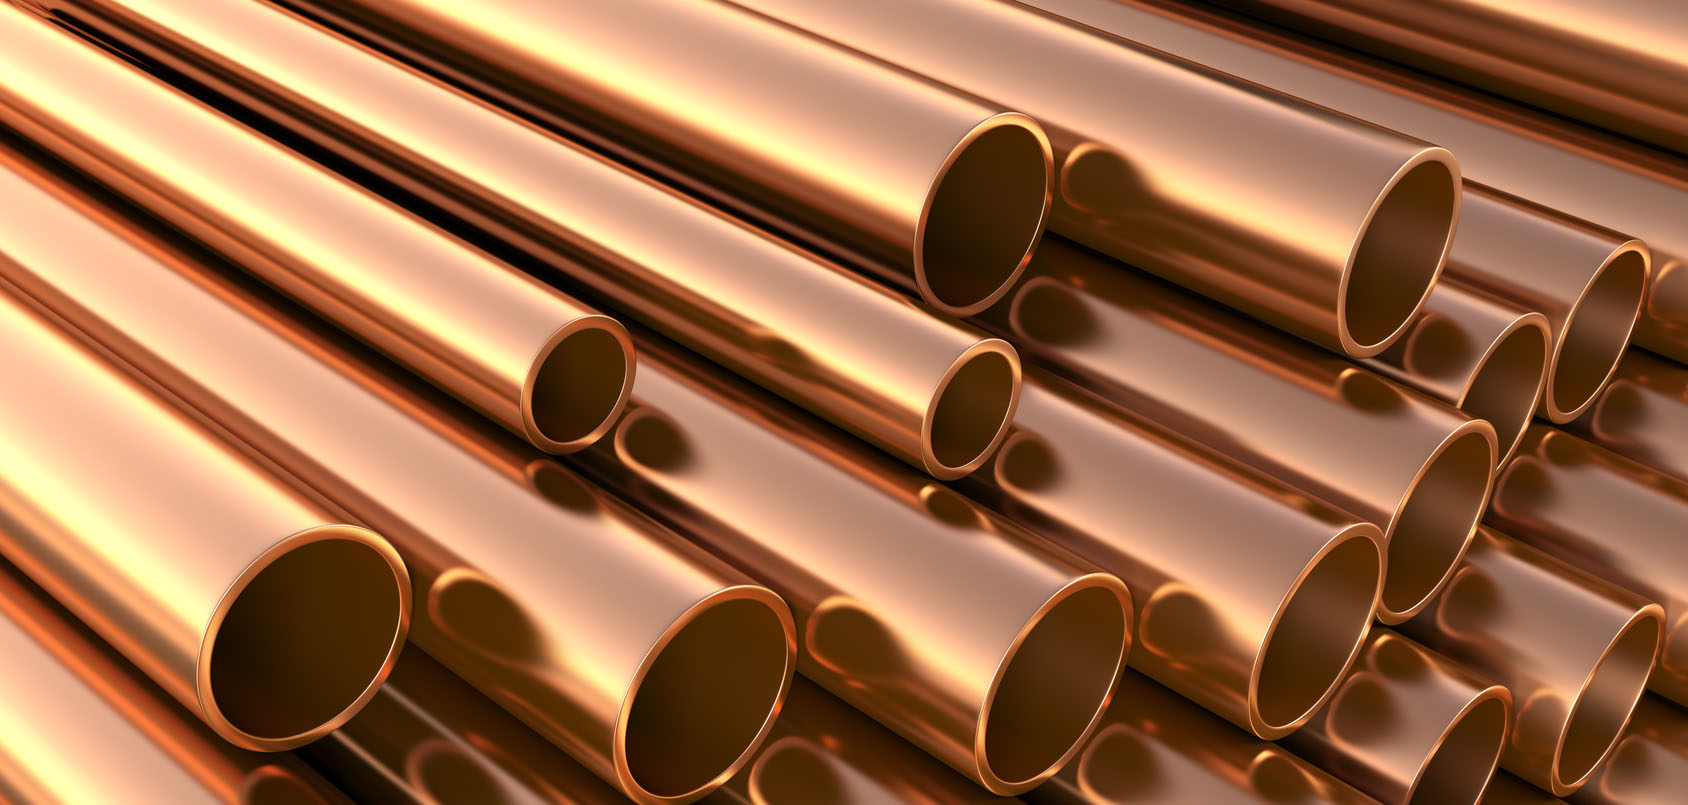 COPPER NICKEL PIPES & TUBE